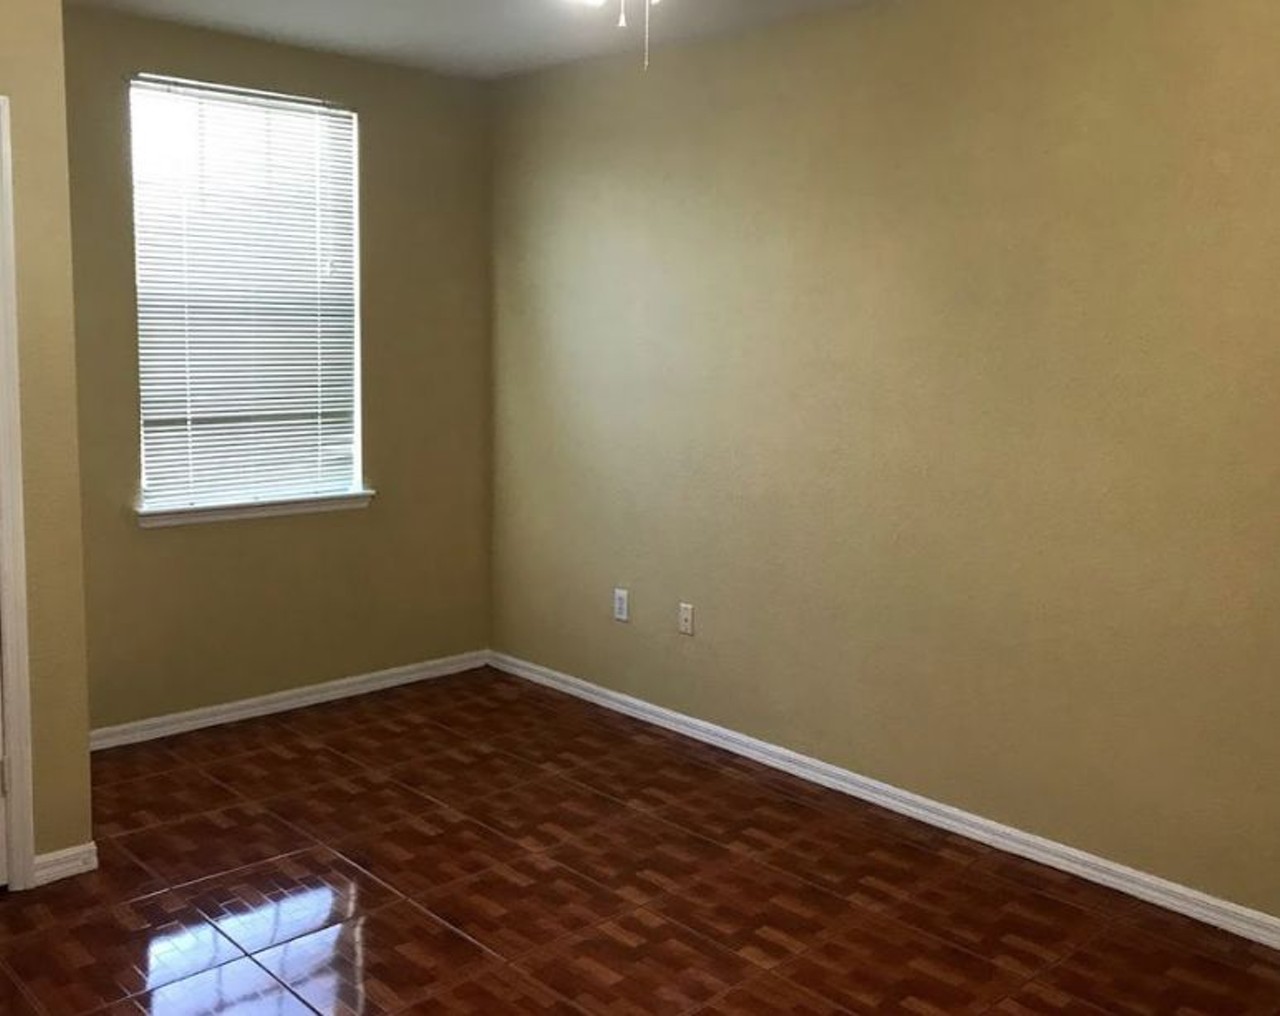 9910 Turf Way, Orlando
$1,225/mo
2 bed, 2 bath, 905 sqft
The bedrooms are spacious and that window offers plenty of natural light.